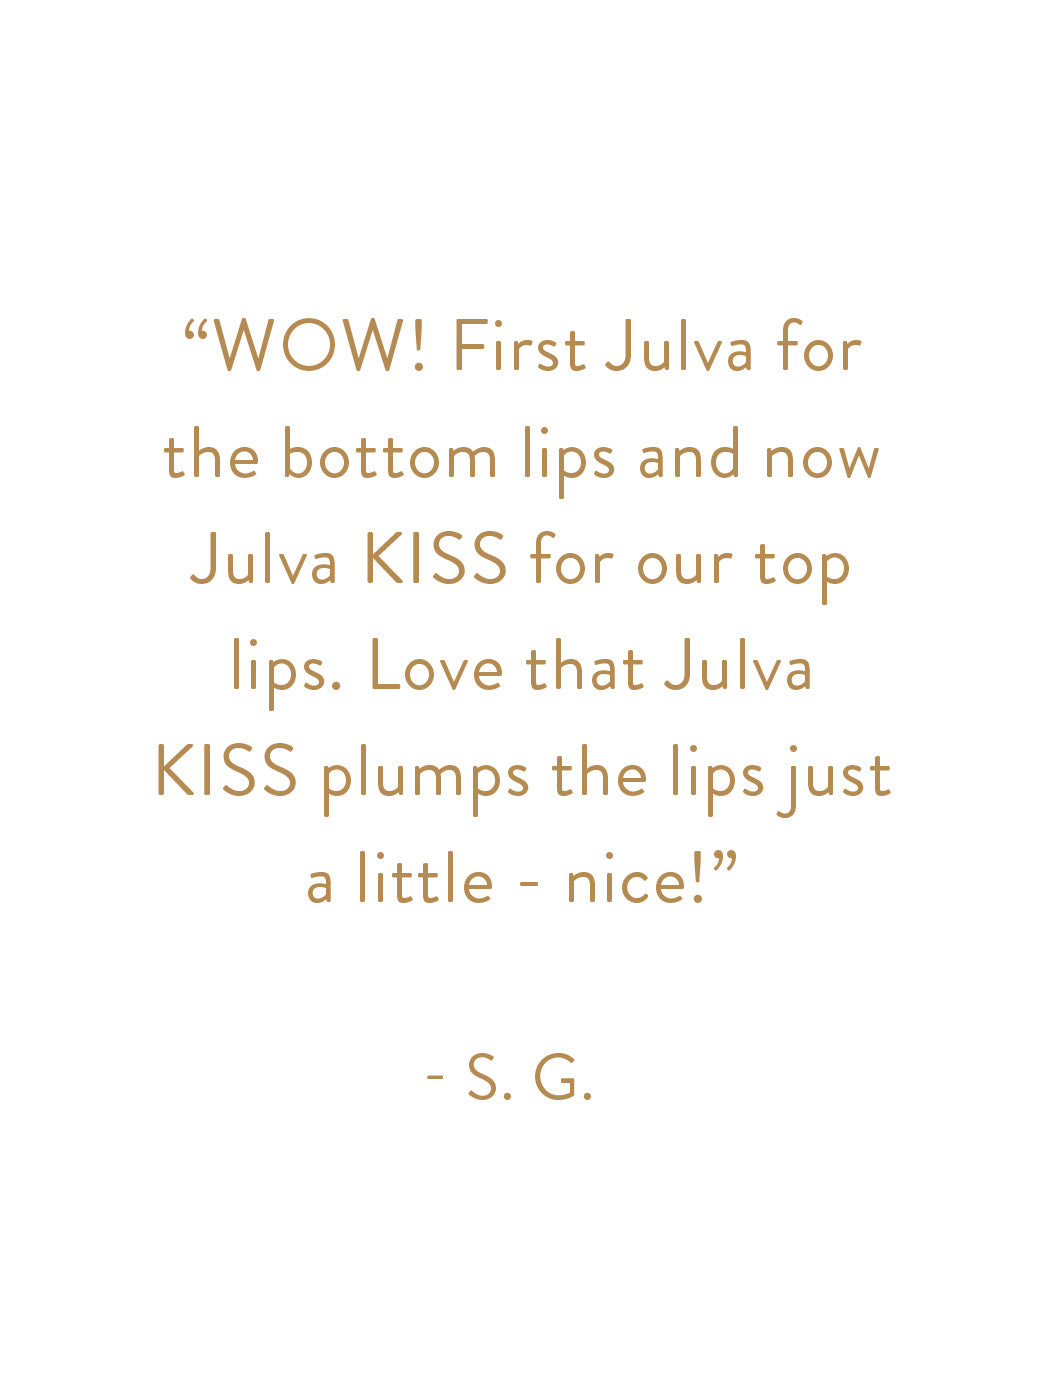 "WOW! First Julva for the bottom lips and now Julva KISS for our top lips. Love that Julva KISS plumps the lips just a little - nice!" - S. G.